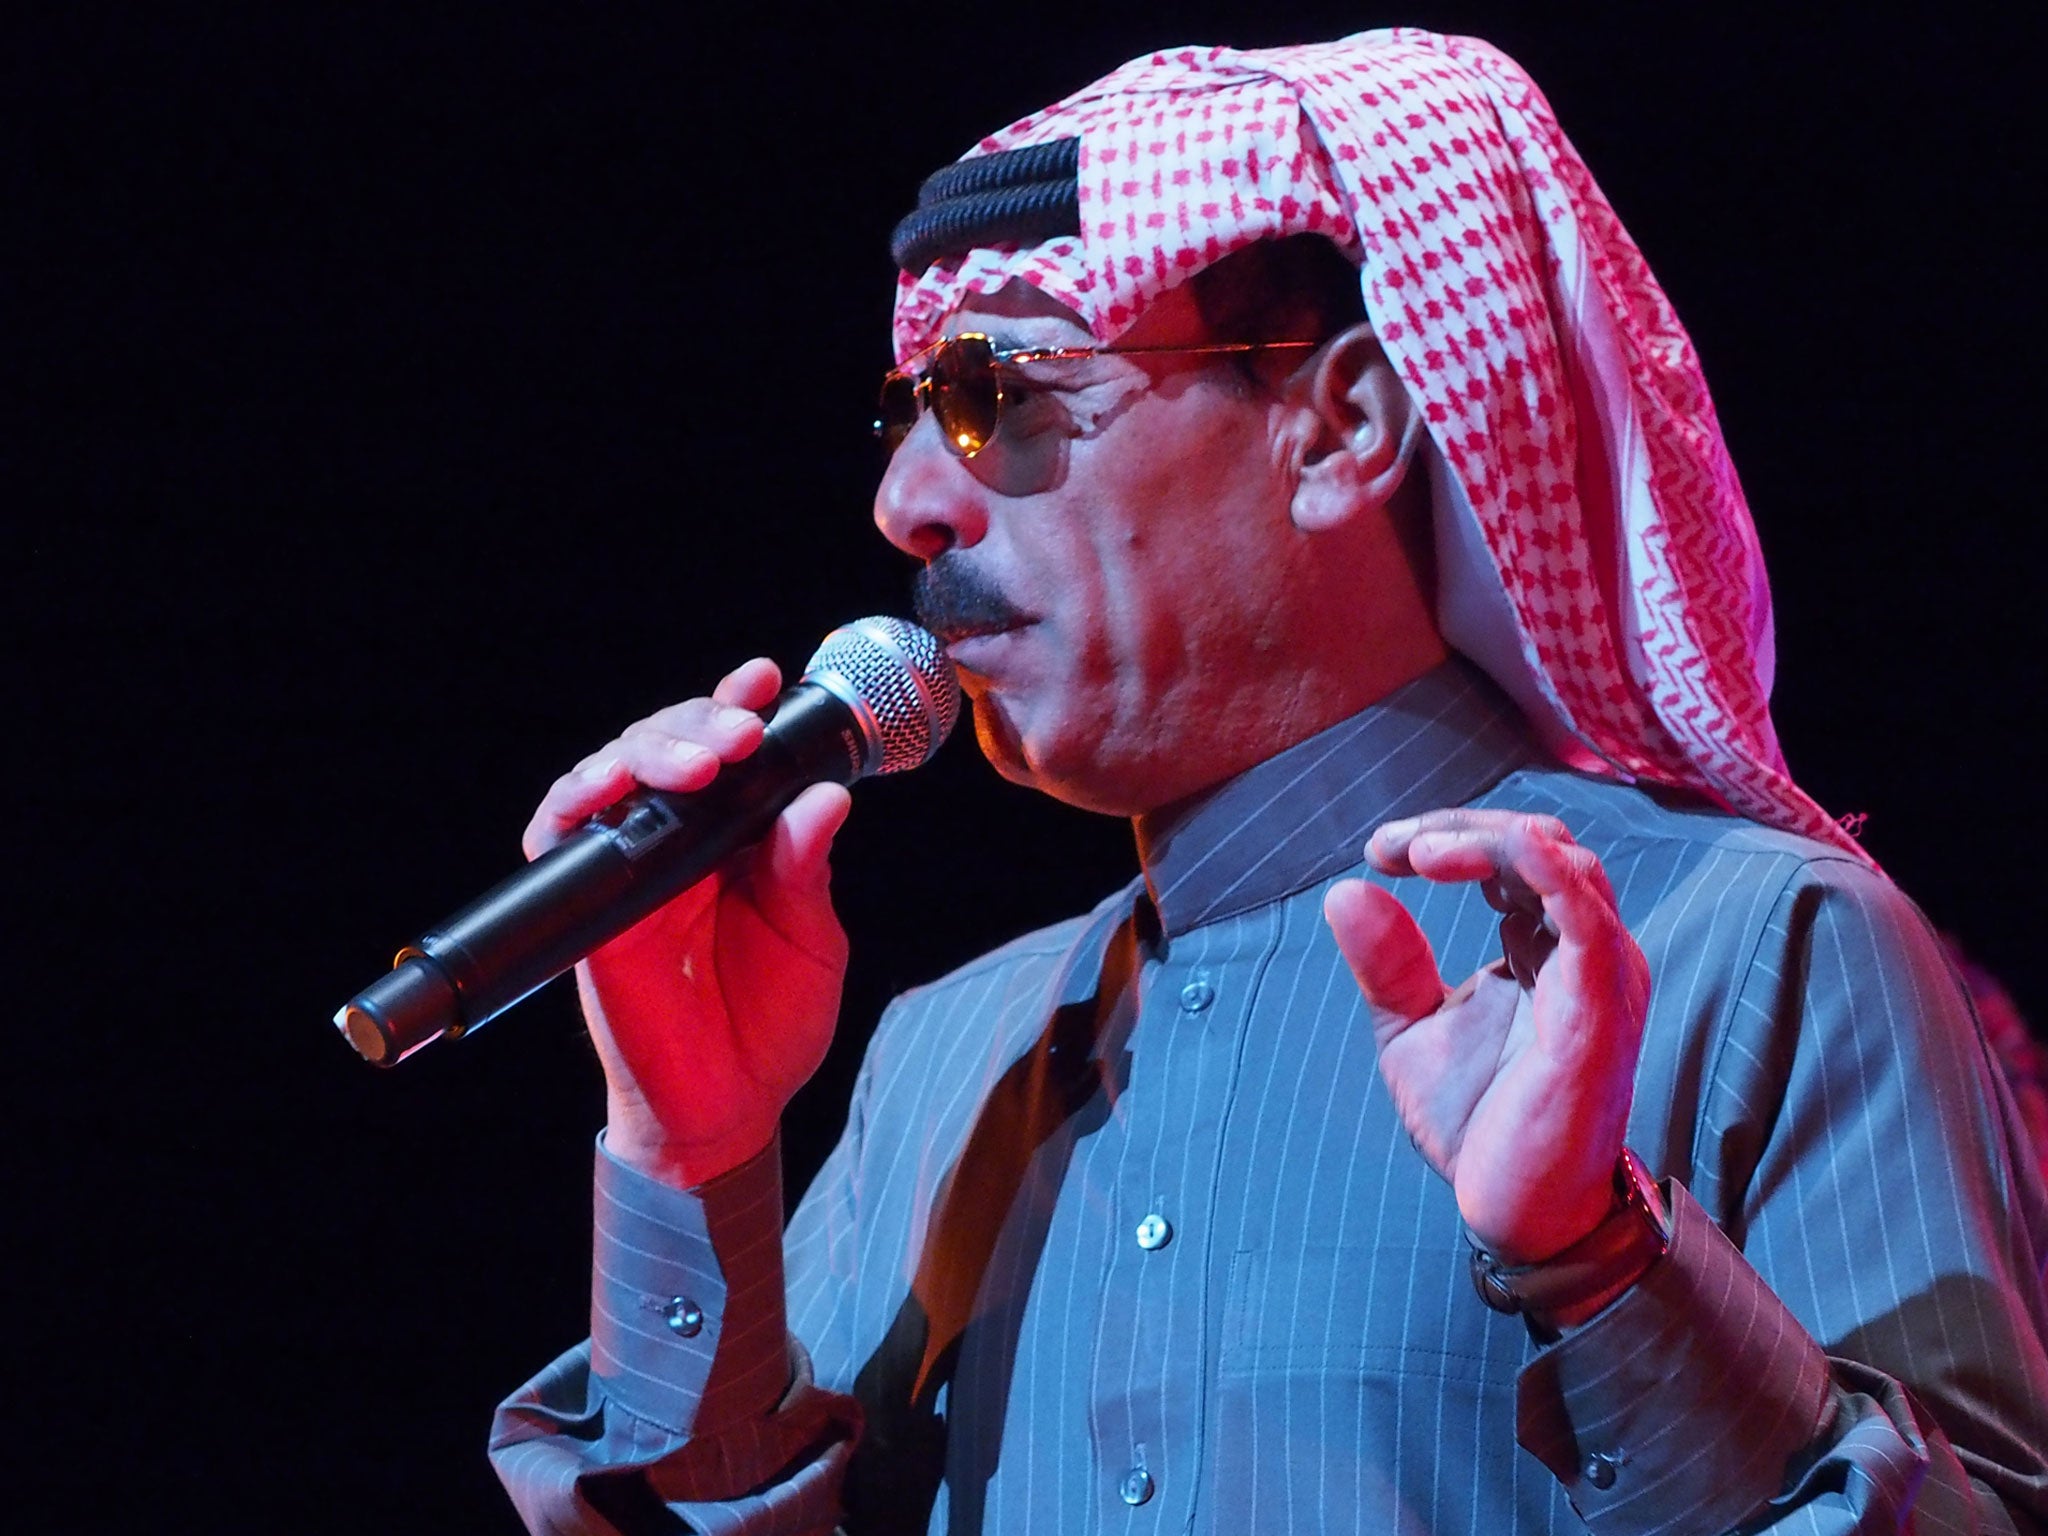 Omar Souleyman is seen here performing earlier this year in Texas at a benefit concert for victims of the Syrian conflict.